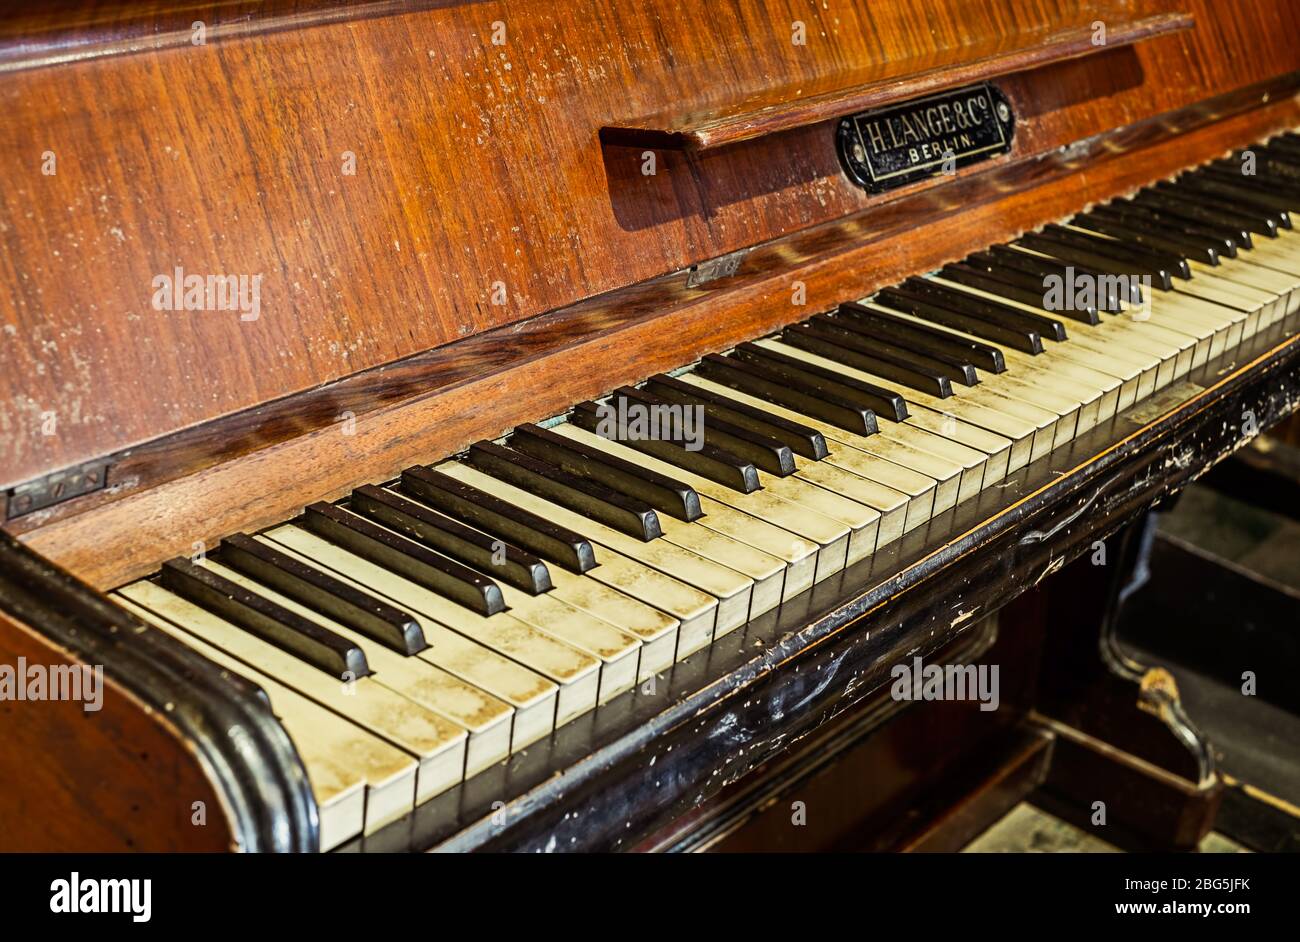 Valletta city, Malta - July 19, 2019. View of the antique Walnut upright  piano made by H.Lange & Co Berlin Stock Photo - Alamy